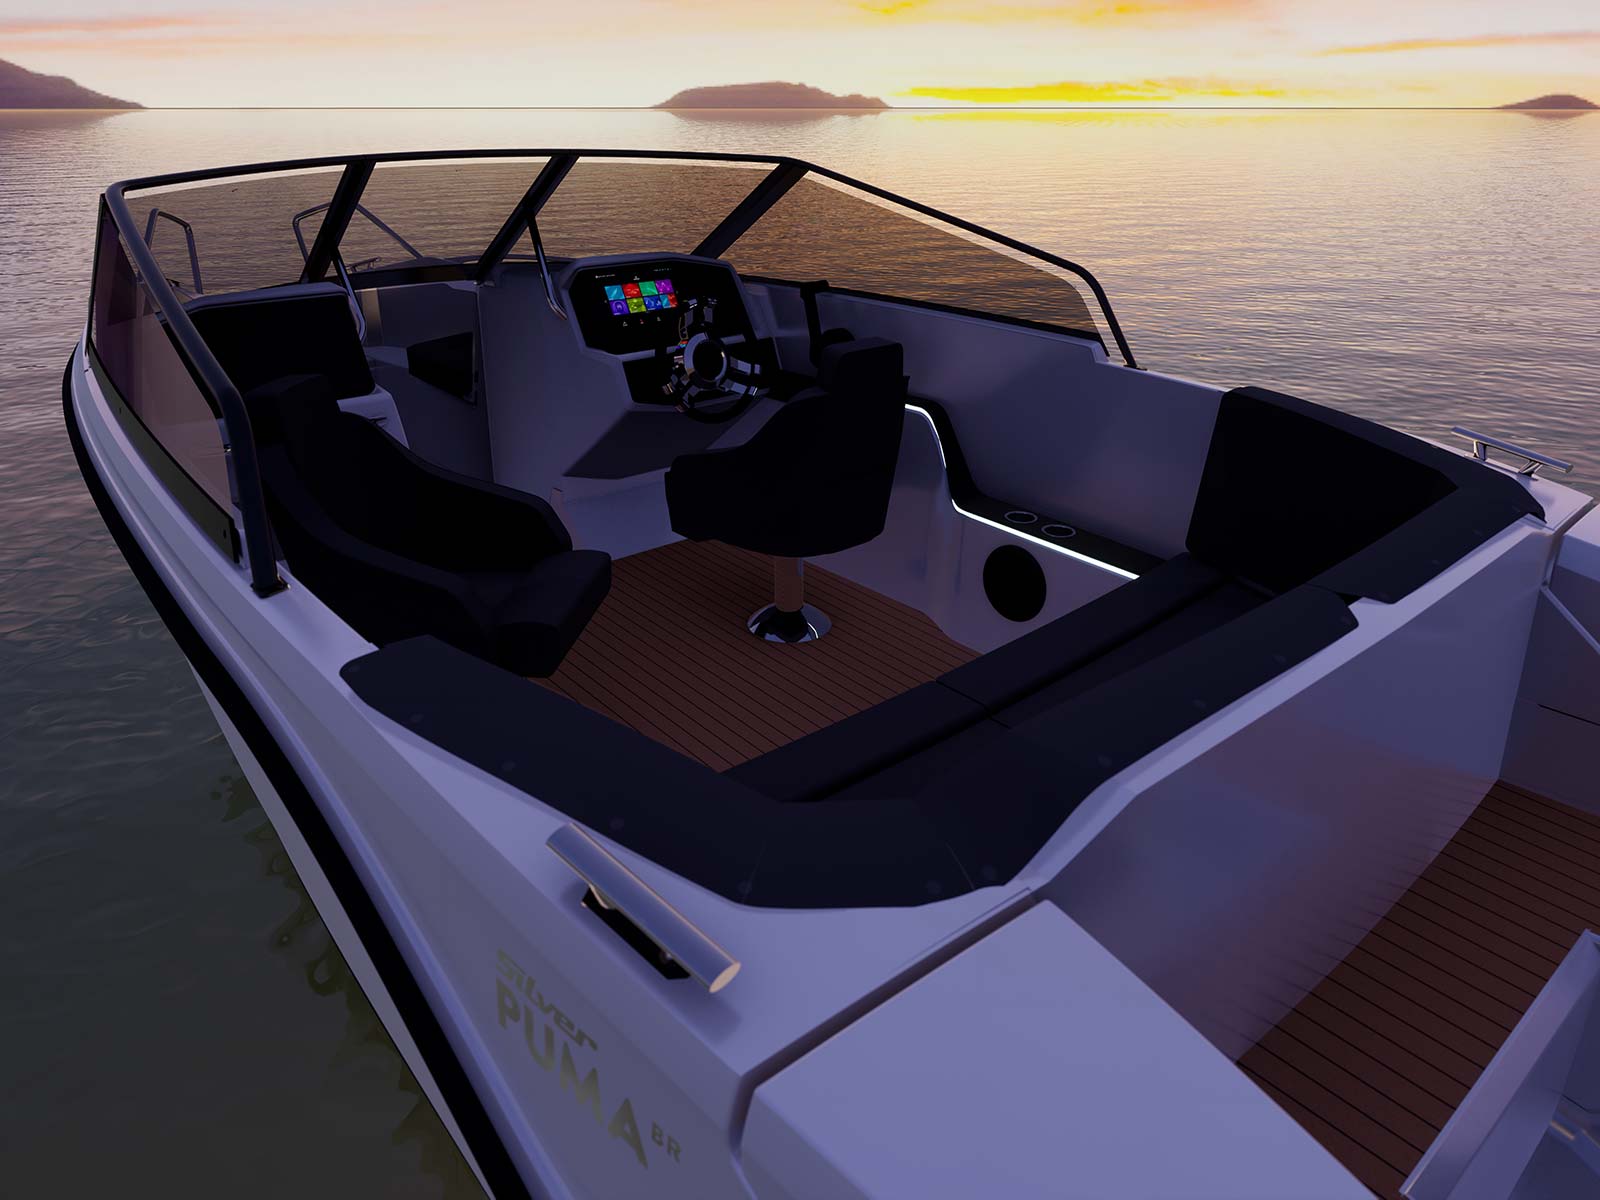 Silver Puma BRz | Boat Solutions, Utting am Ammersee